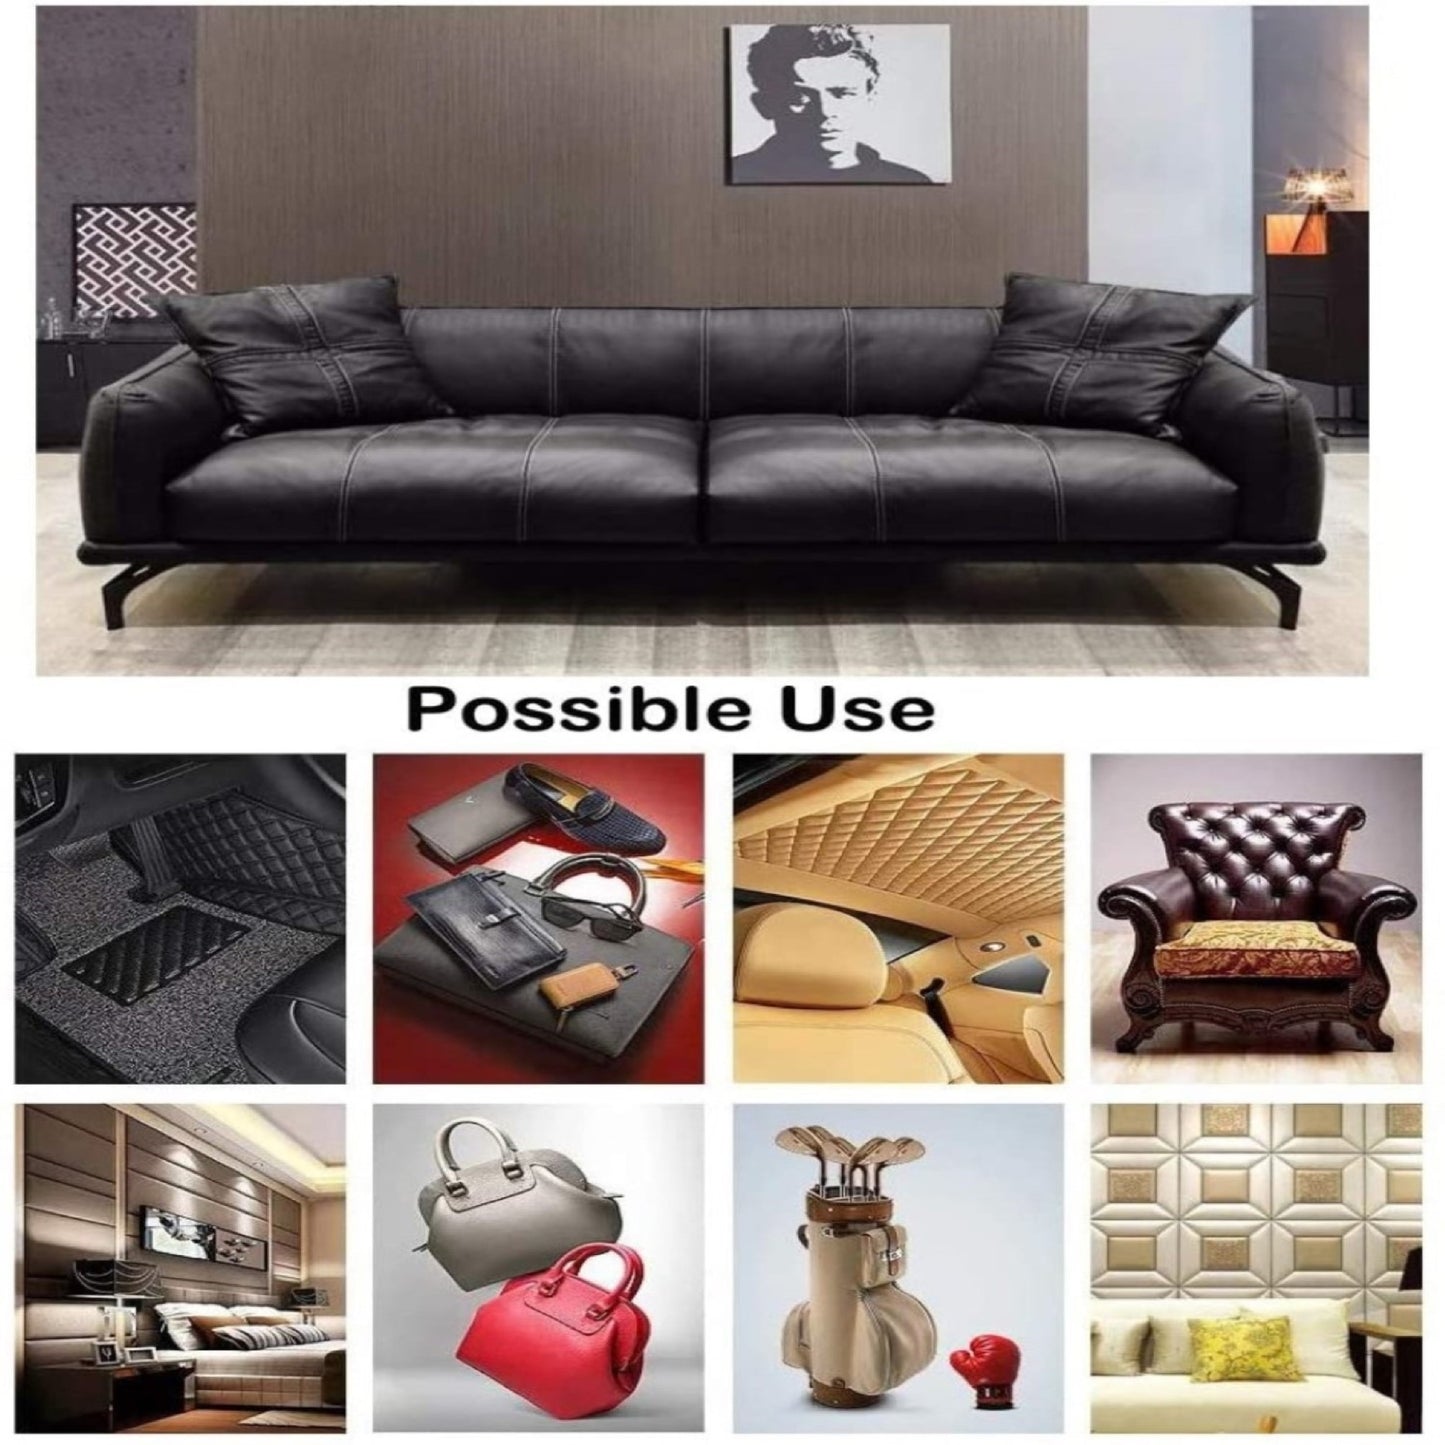 Bowzar Maverick Rexine Leatherette Artificial Leather for Sofa Upholstery Car Interior Home Furnishing